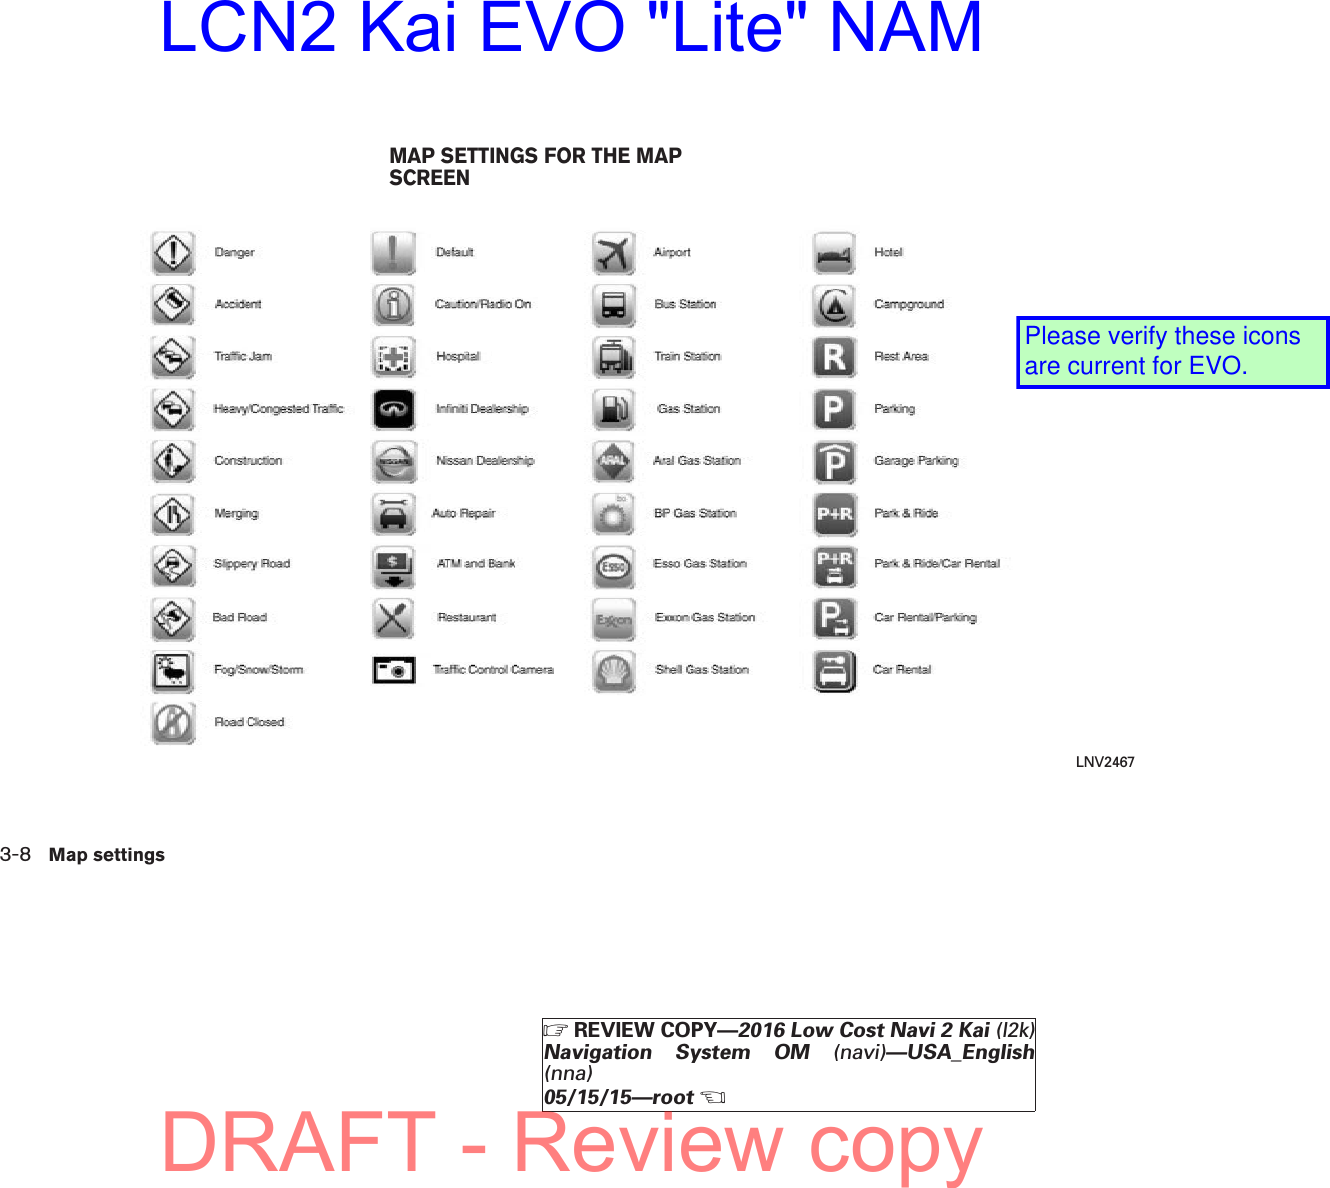 LNV2467MAP SETTINGS FOR THE MAPSCREEN3-8 Map settingsZREVIEW COPY—2016 Low Cost Navi 2 Kai (l2k)Navigation System OM (navi)—USA_English(nna)05/15/15—rootXDRAFT - Review copyLCN2 Kai EVO &quot;Lite&quot; NAMPlease verify these icons are current for EVO.